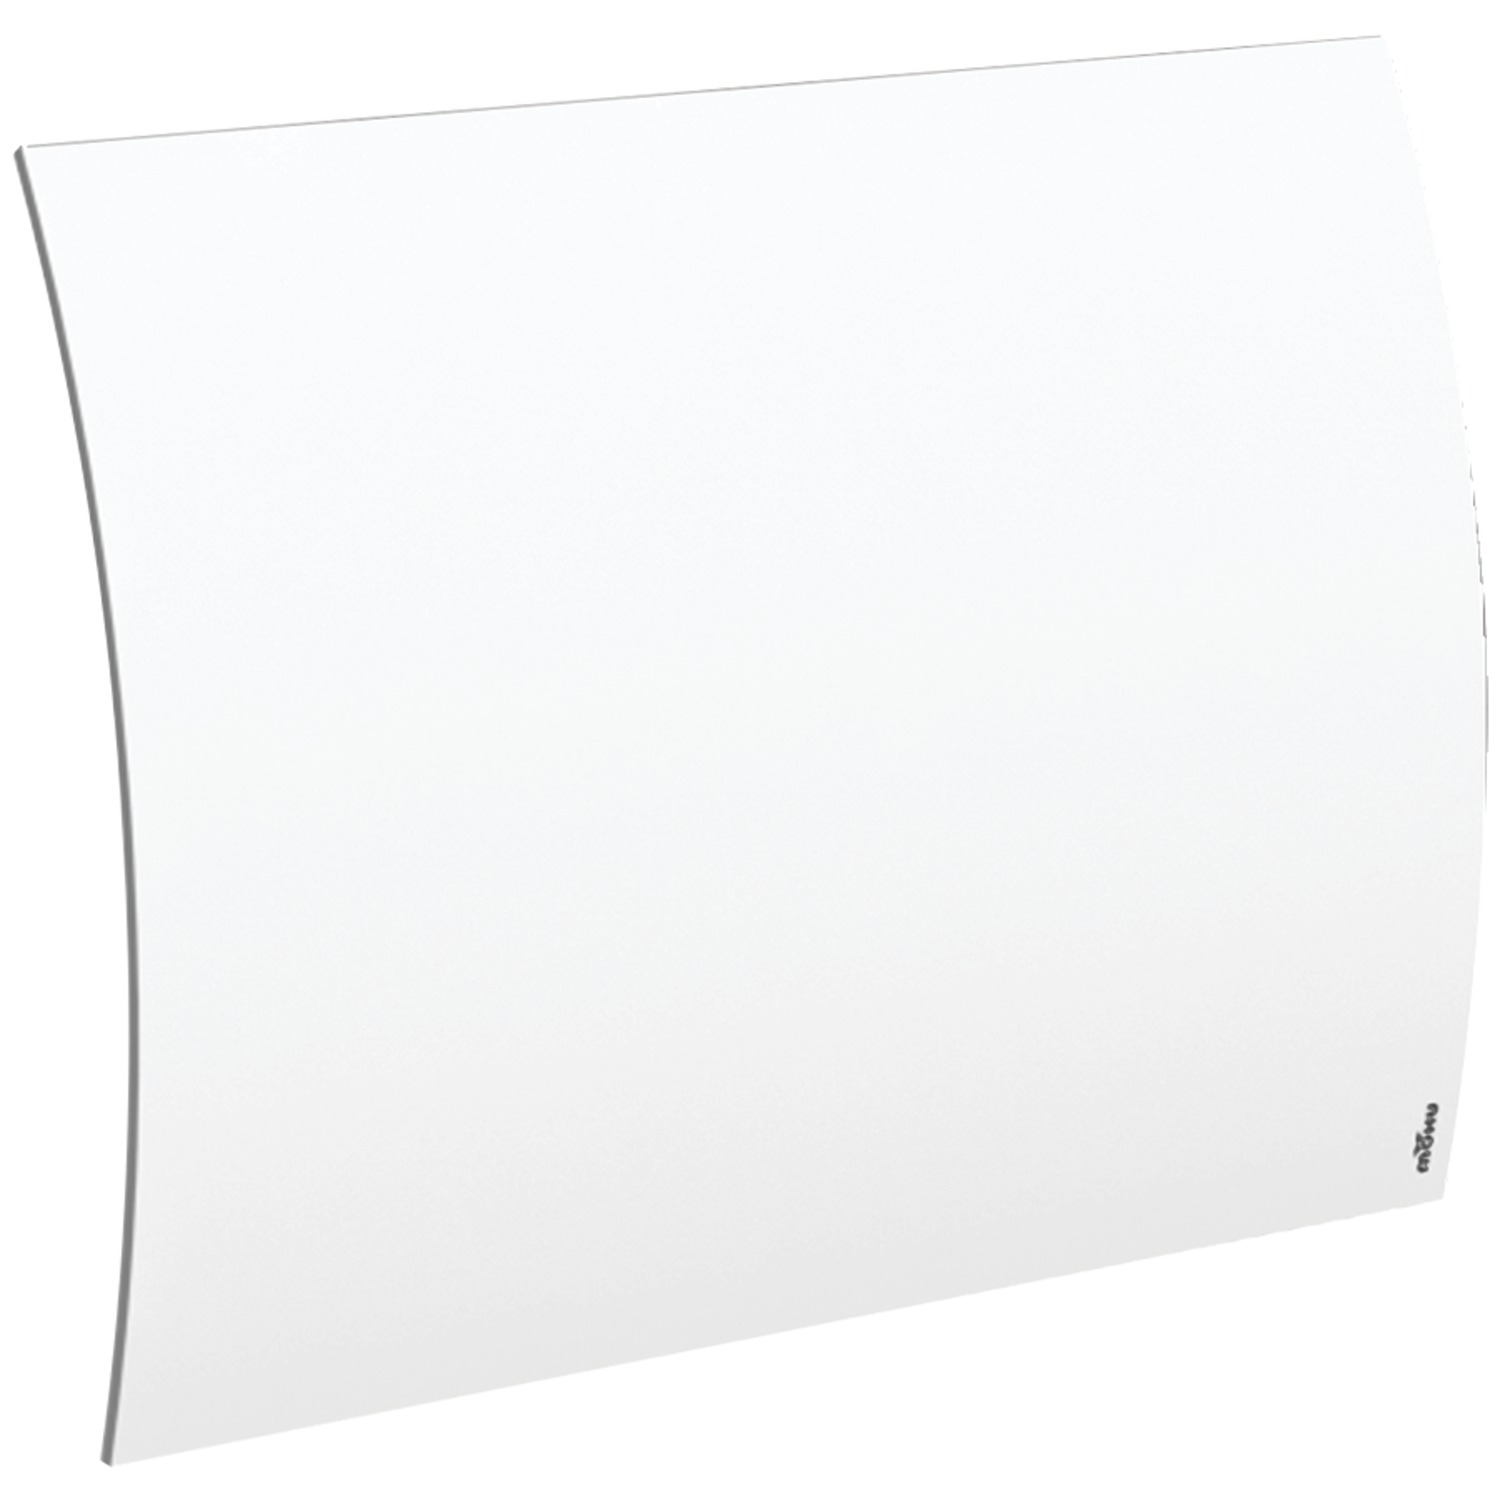 Mohu Curve 30 Designer Table Top 30-Mile Indoor HDTV Antenna - image 5 of 15